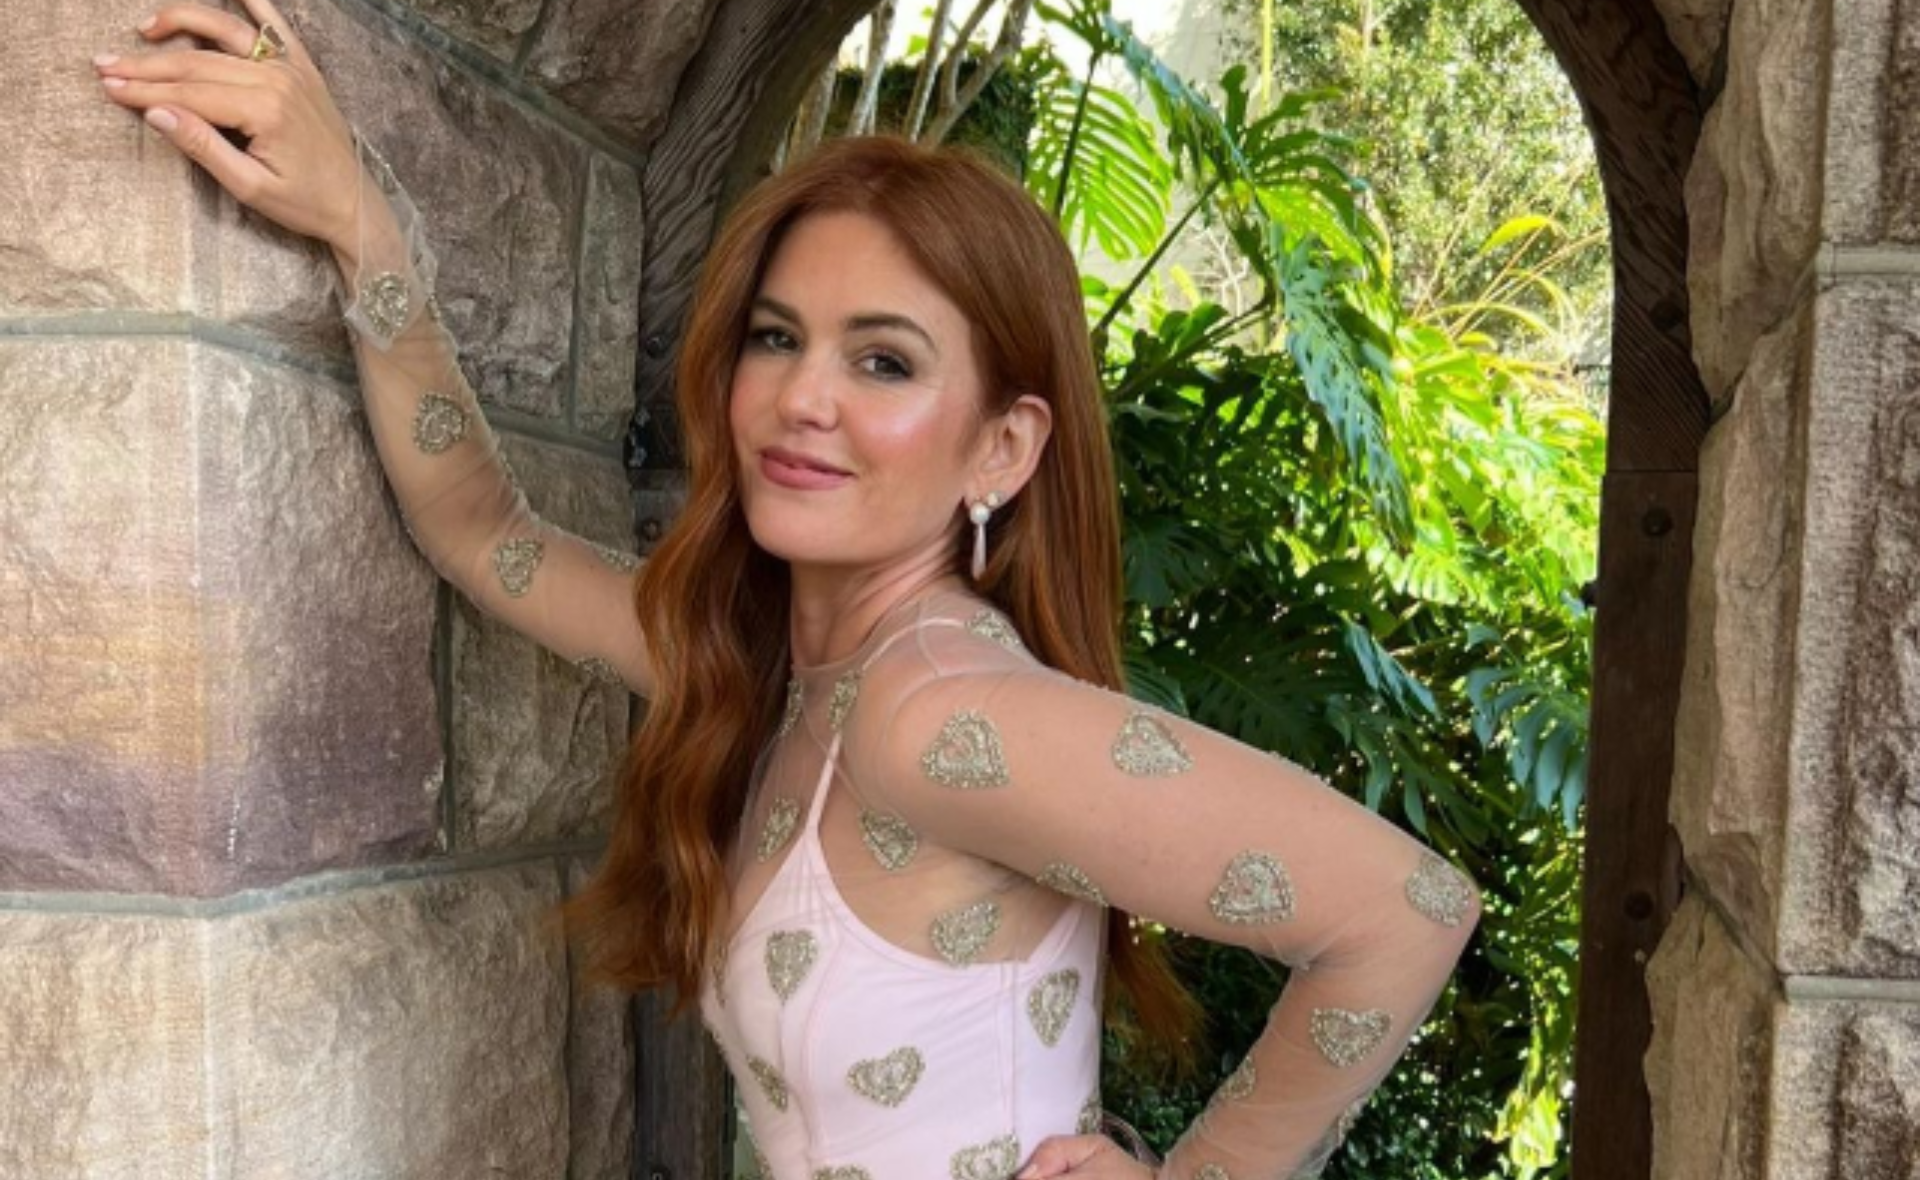 From early life on Home and Away to family: Everything we know about Aussie sweetheart Isla Fisher